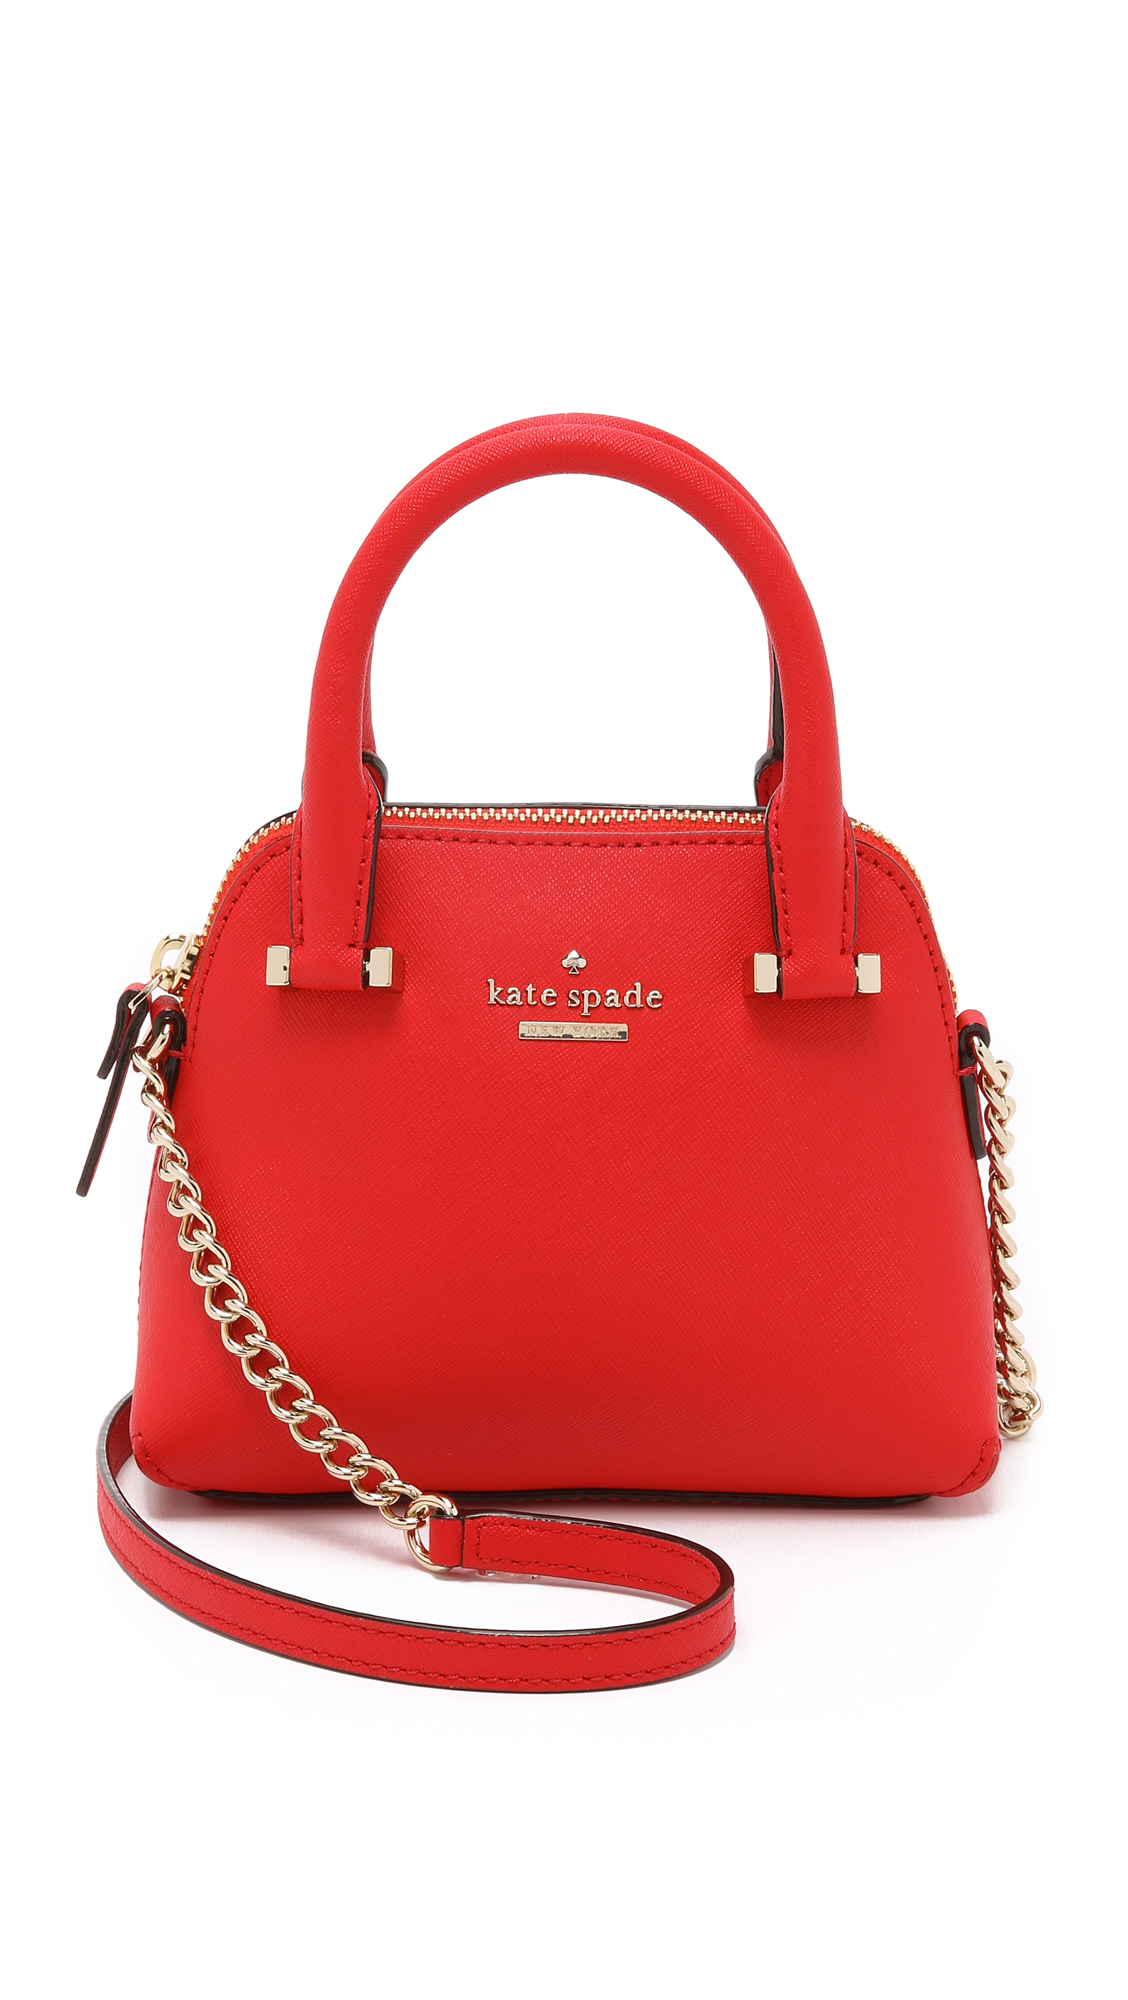 Lyst - Kate Spade Mini Maise Cross Body Bag - Cherry Liqueur in Red